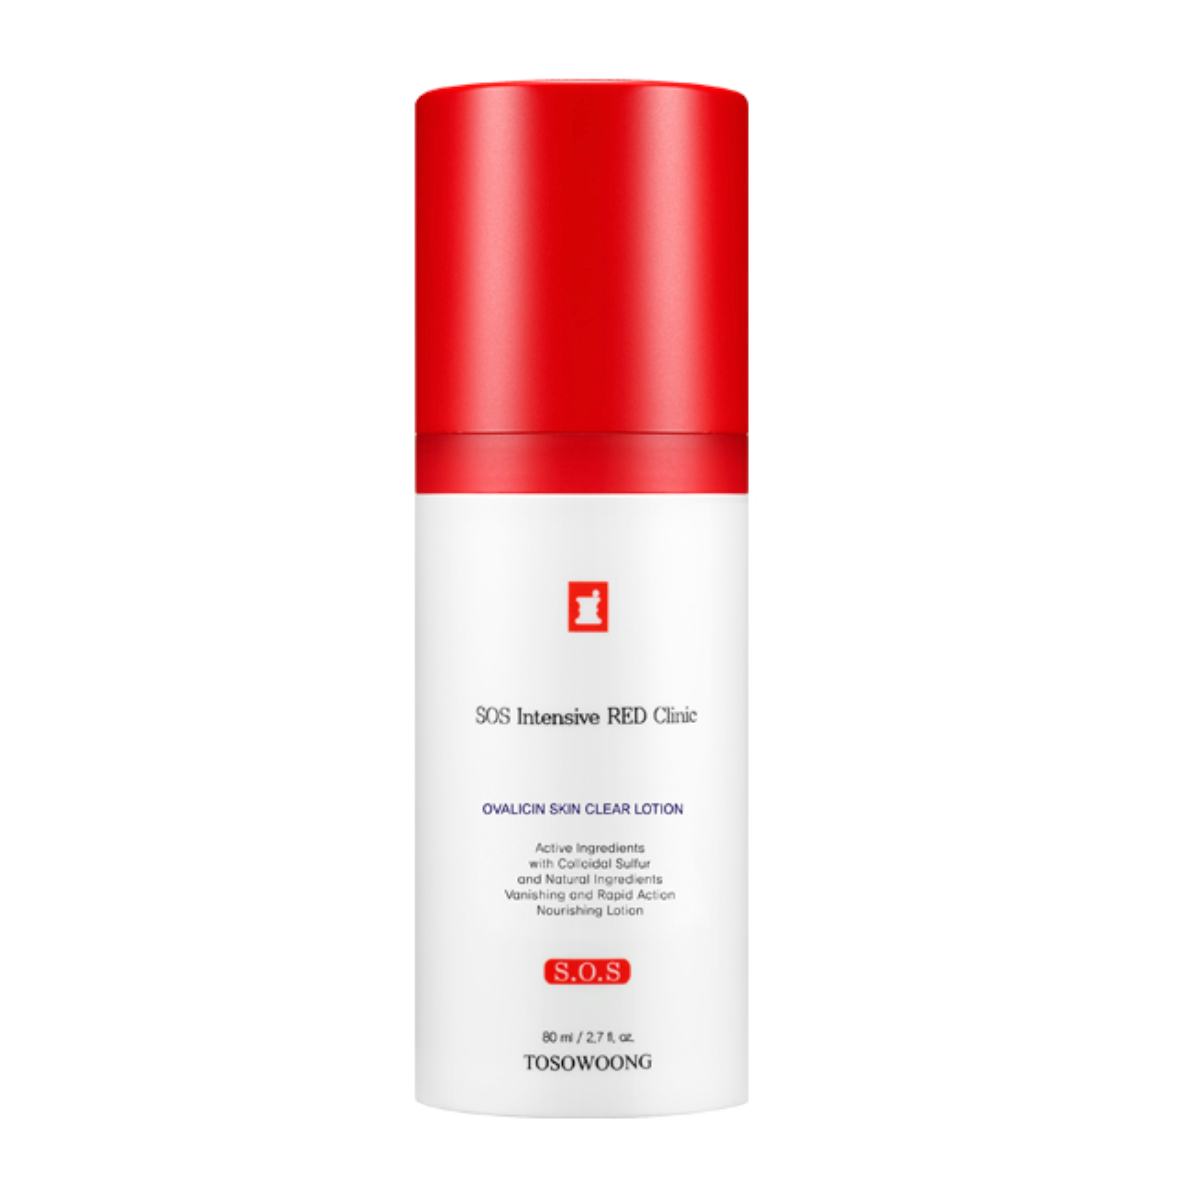 RED Clinic Ovalicin Skin Clear Lotion